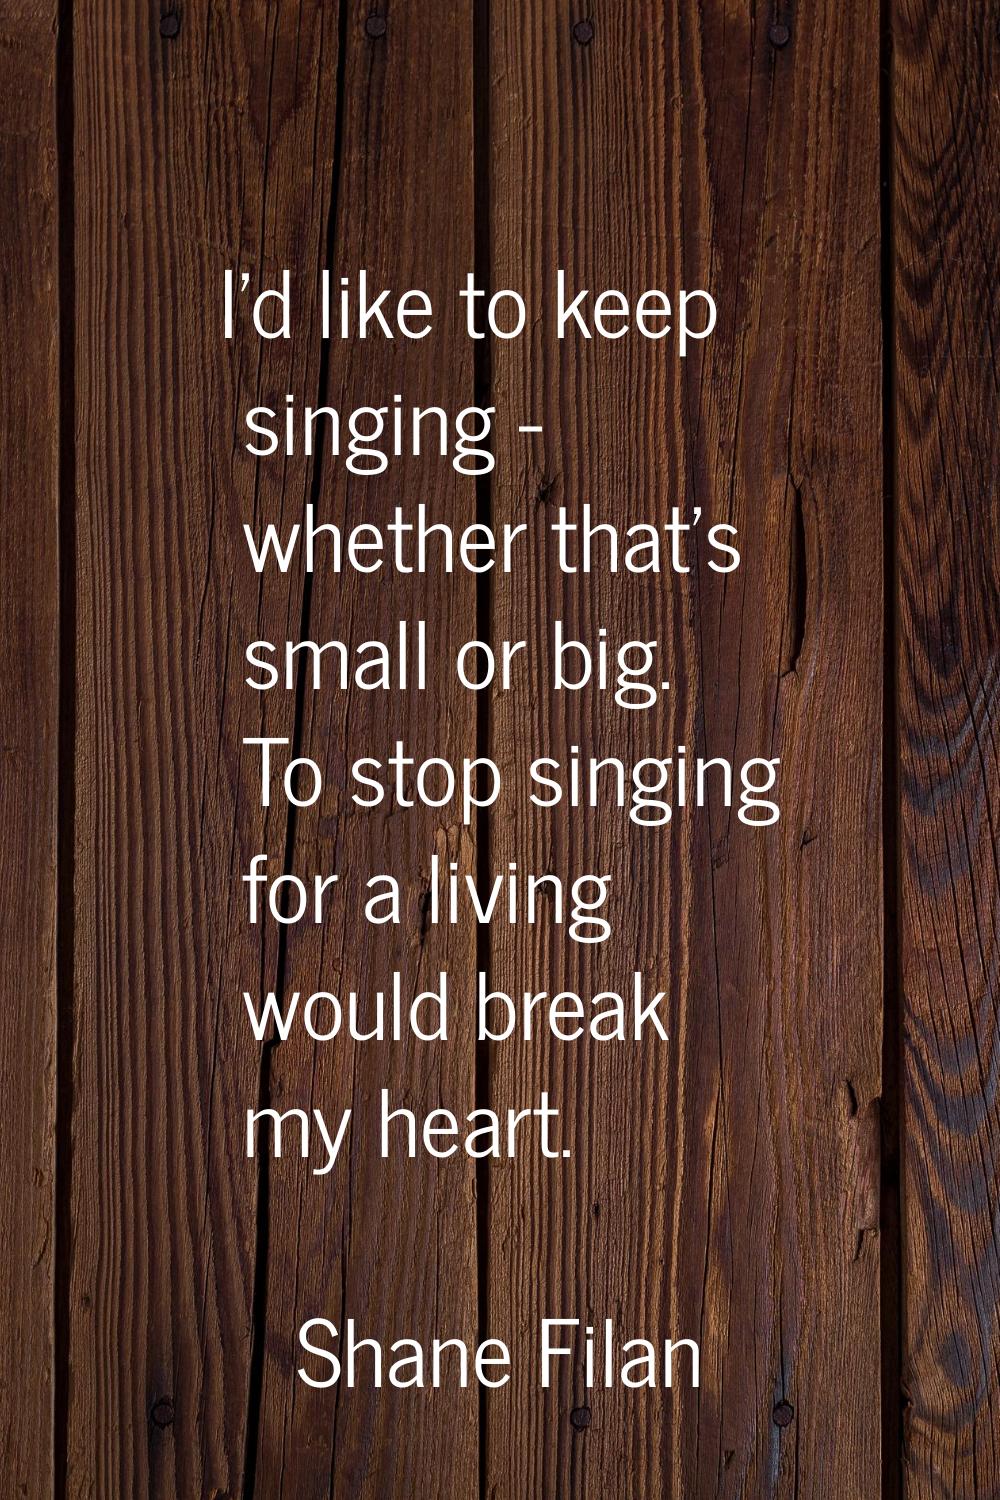 I'd like to keep singing - whether that's small or big. To stop singing for a living would break my